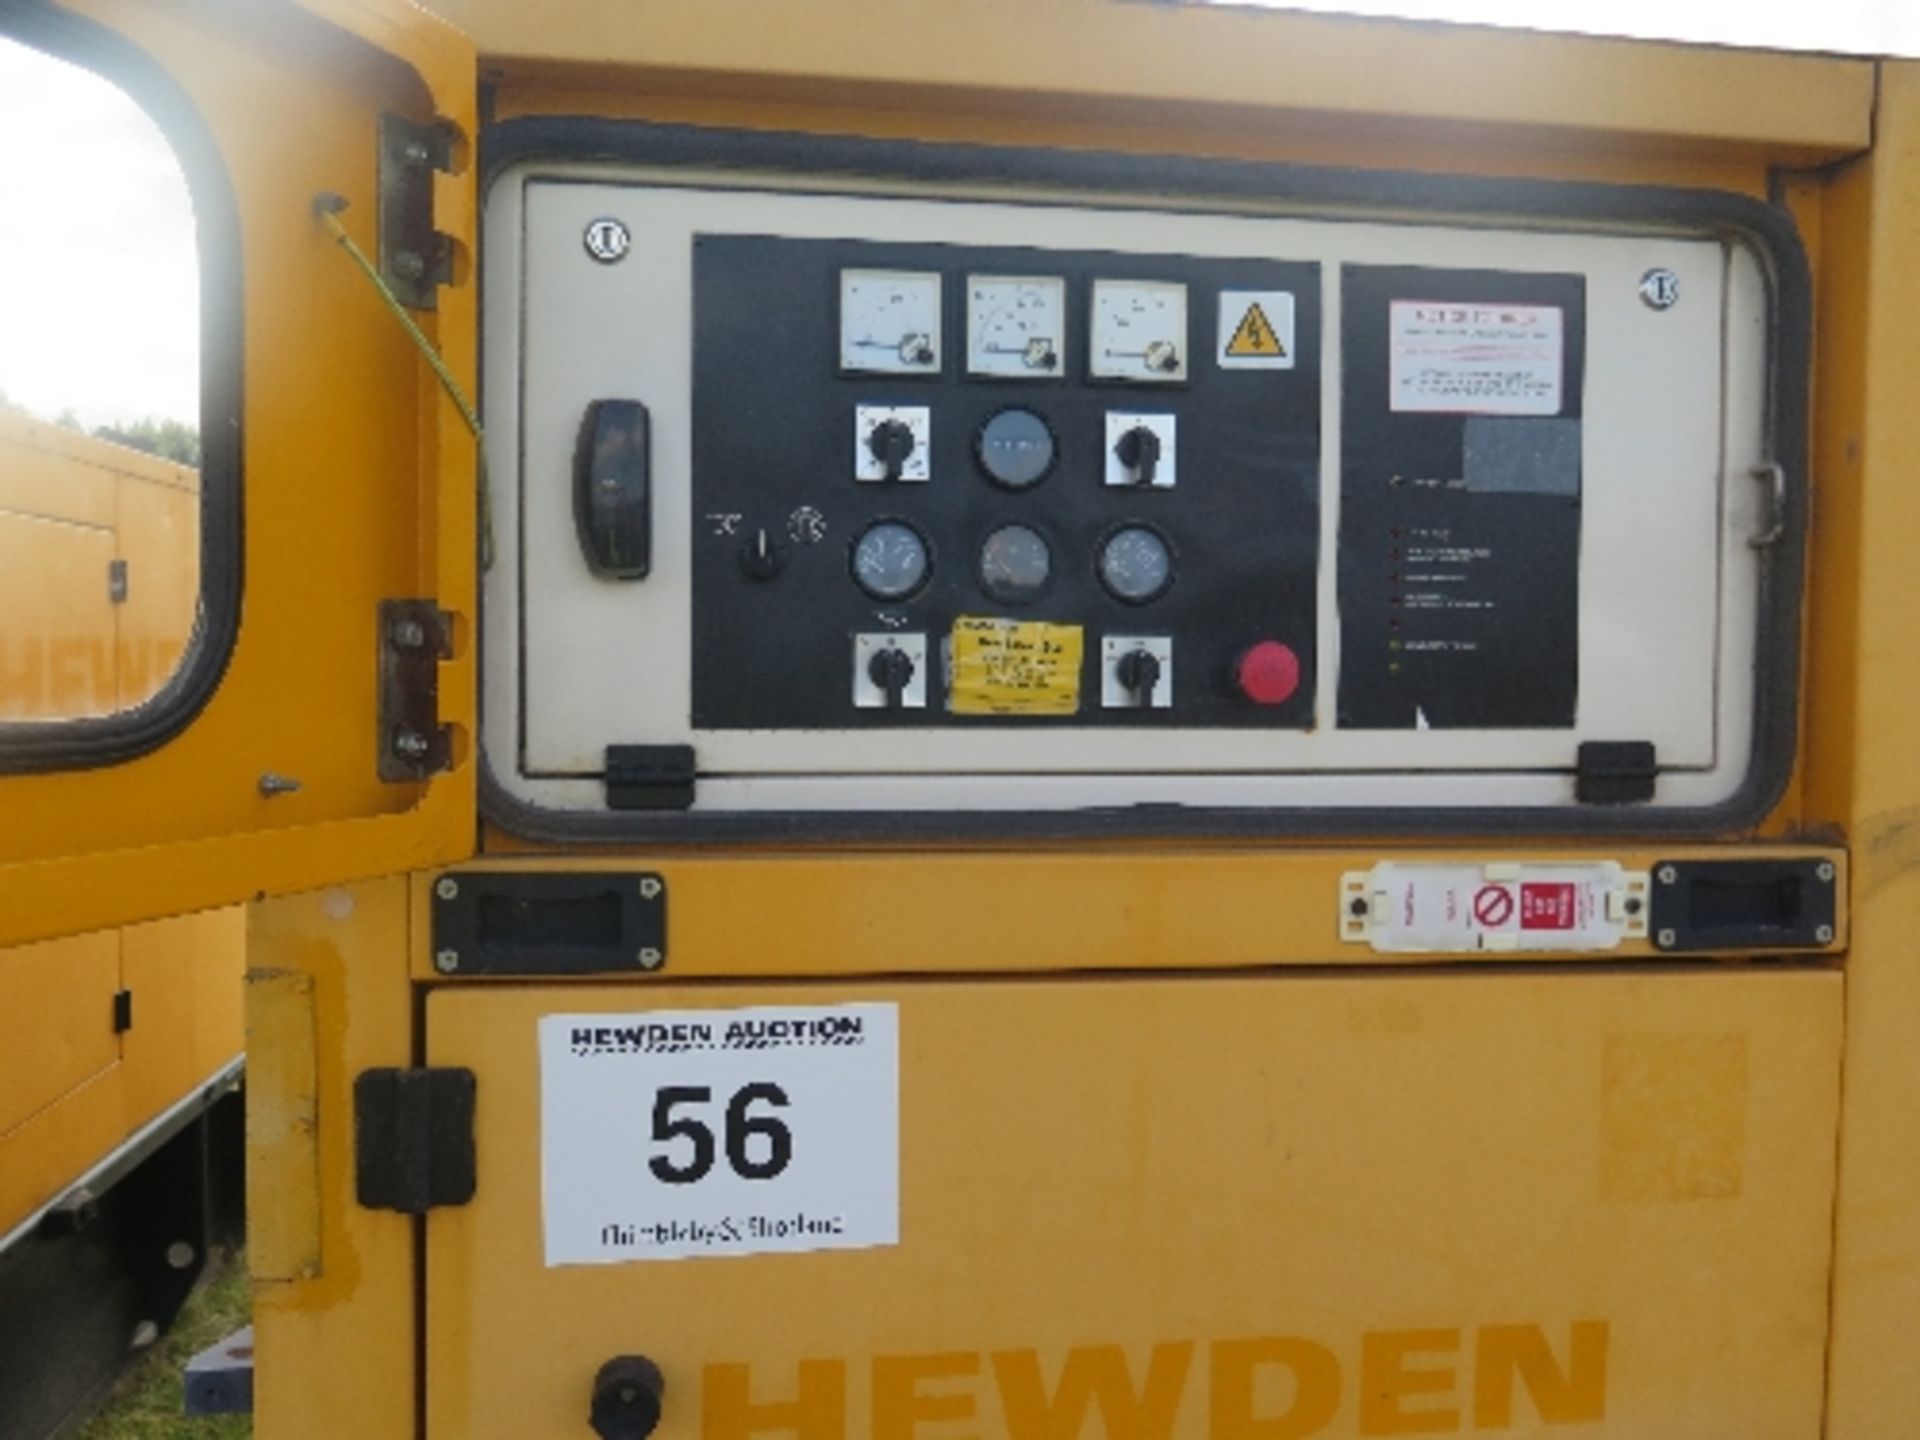 Caterpillar XQE100 generator 158072 12811 hrs
PERKINS - RUNS AND MAKES POWER
ALL LOTS are SOLD - Image 2 of 6